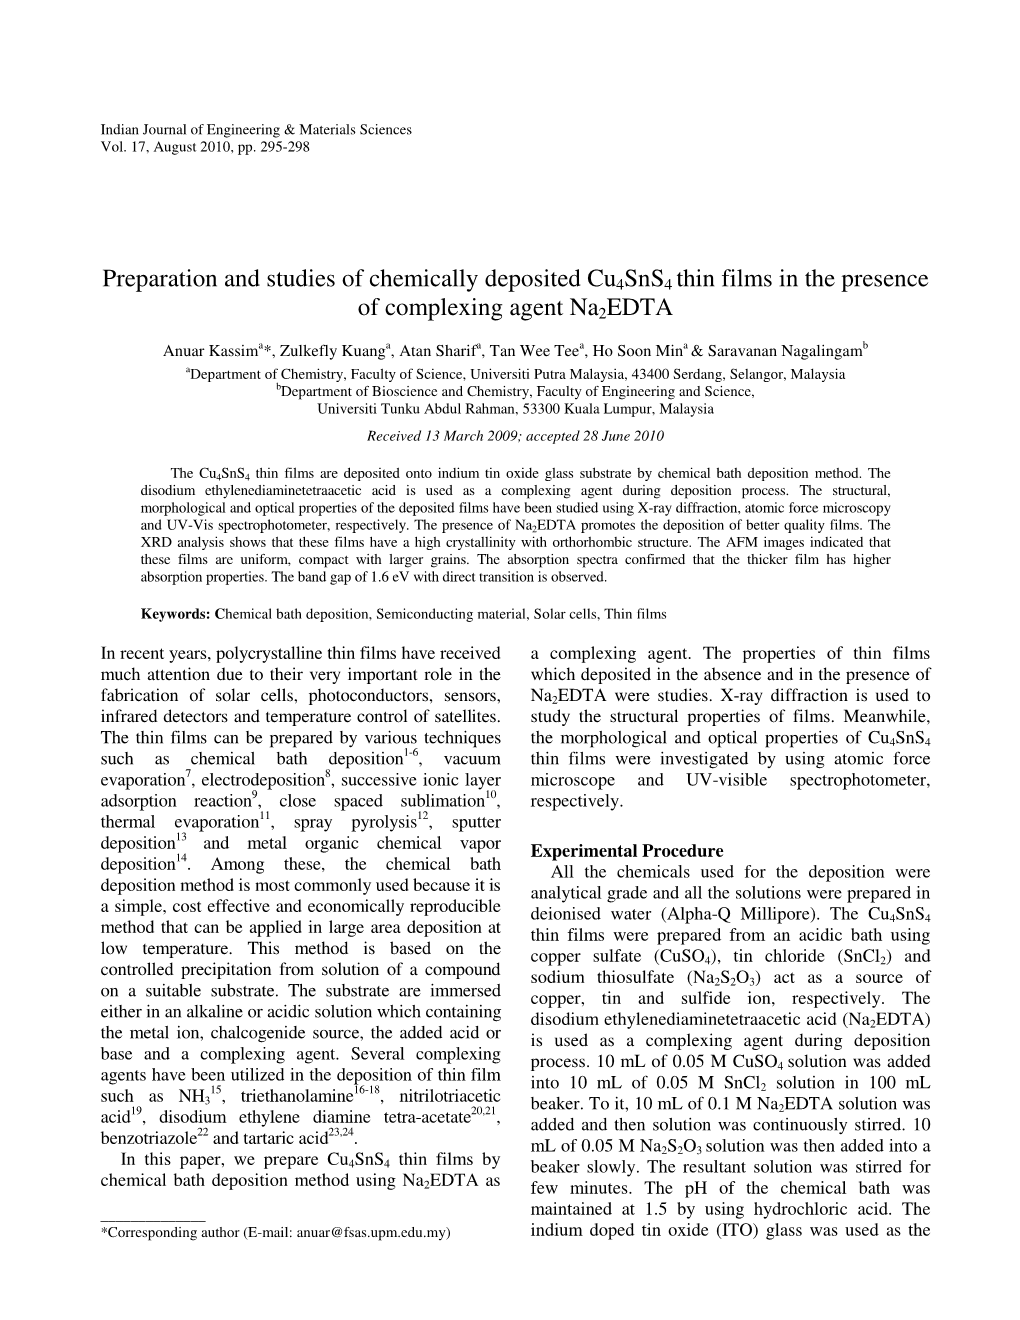 Preparation and Studies of Chemically Deposited Cu4sns4 Thin Films in The